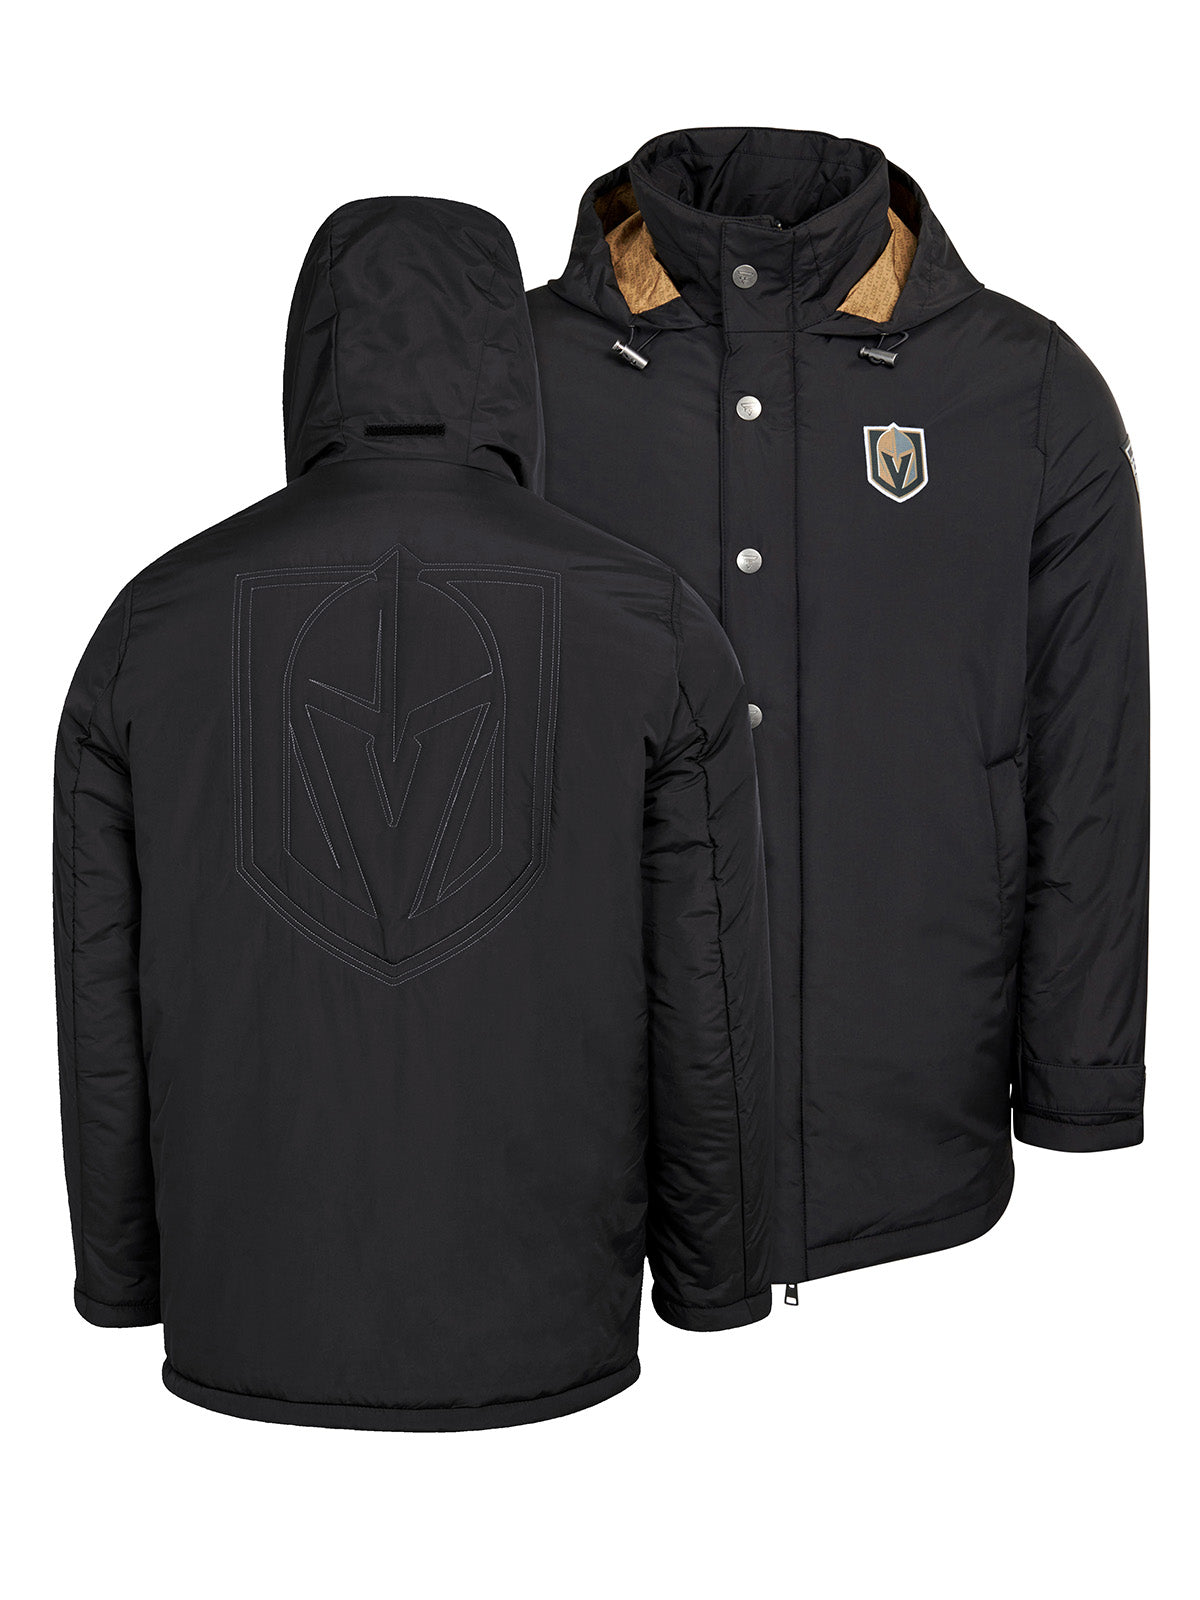 Vegas Golden Knights Coach's Jacket - The jacket features a quilted stitch of the Vegas Golden Knights logo centered on the back and has a removal hood in the team colors, elevating this NHL hockey clothing collection